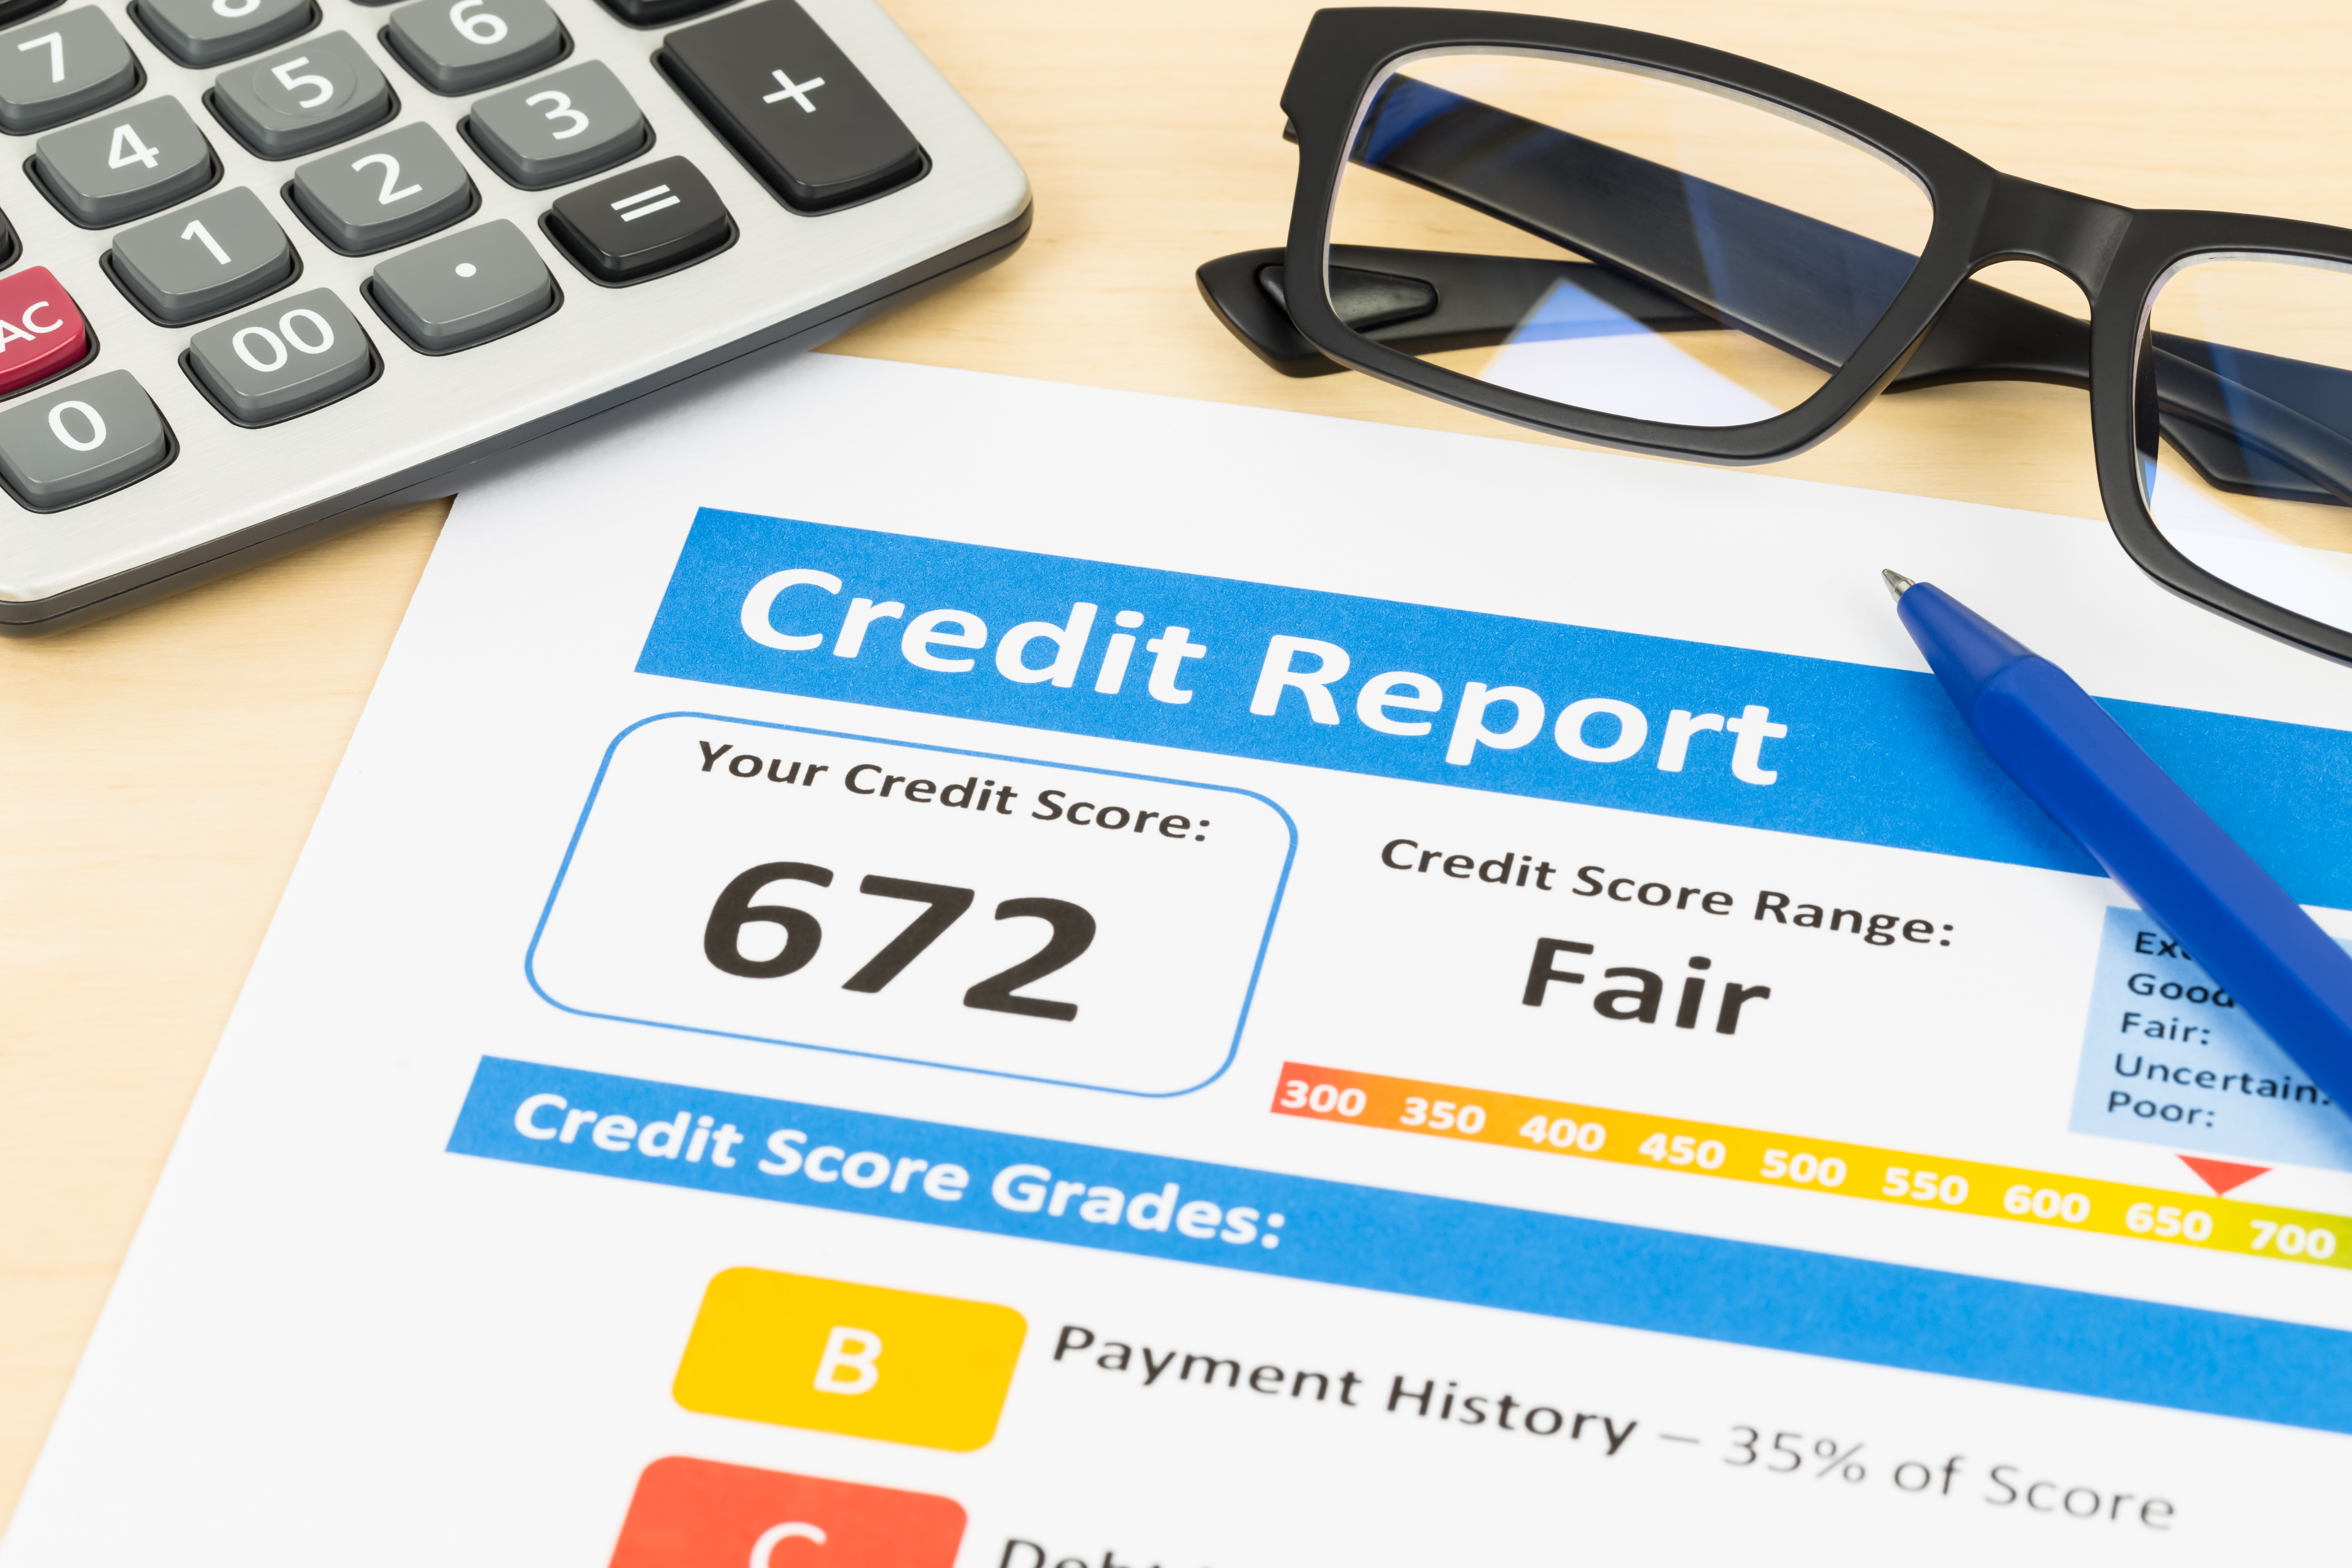 Why You Should Monitor Your Credit Score